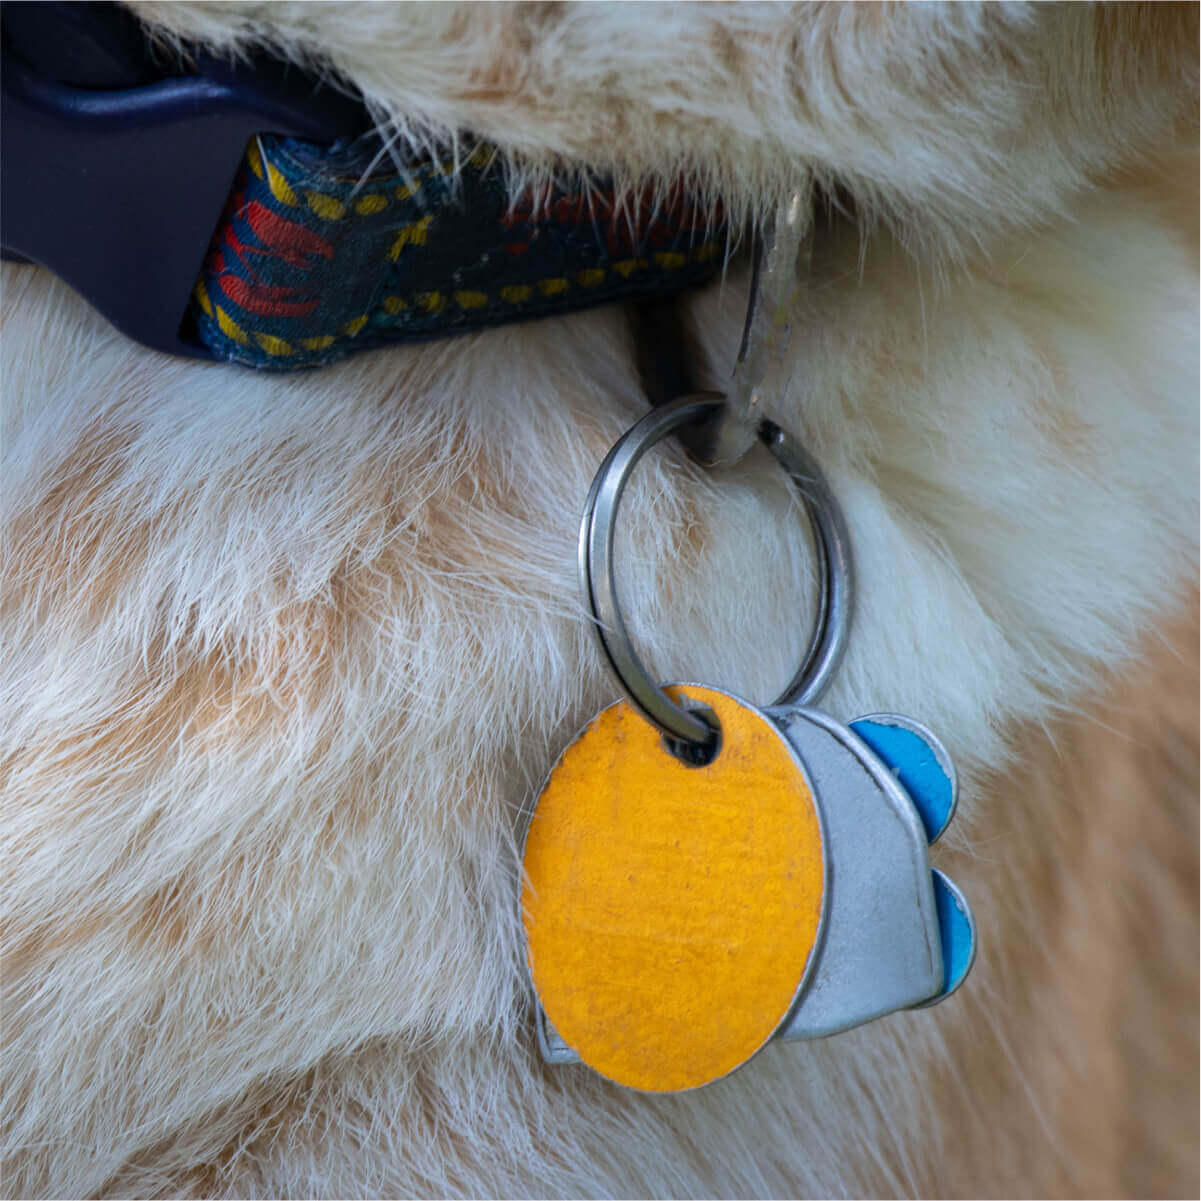 Collar and Chip - A cheerful dog wearing a collar with a vibrant yellow and blue tag, making it easy to spot in a crowd.